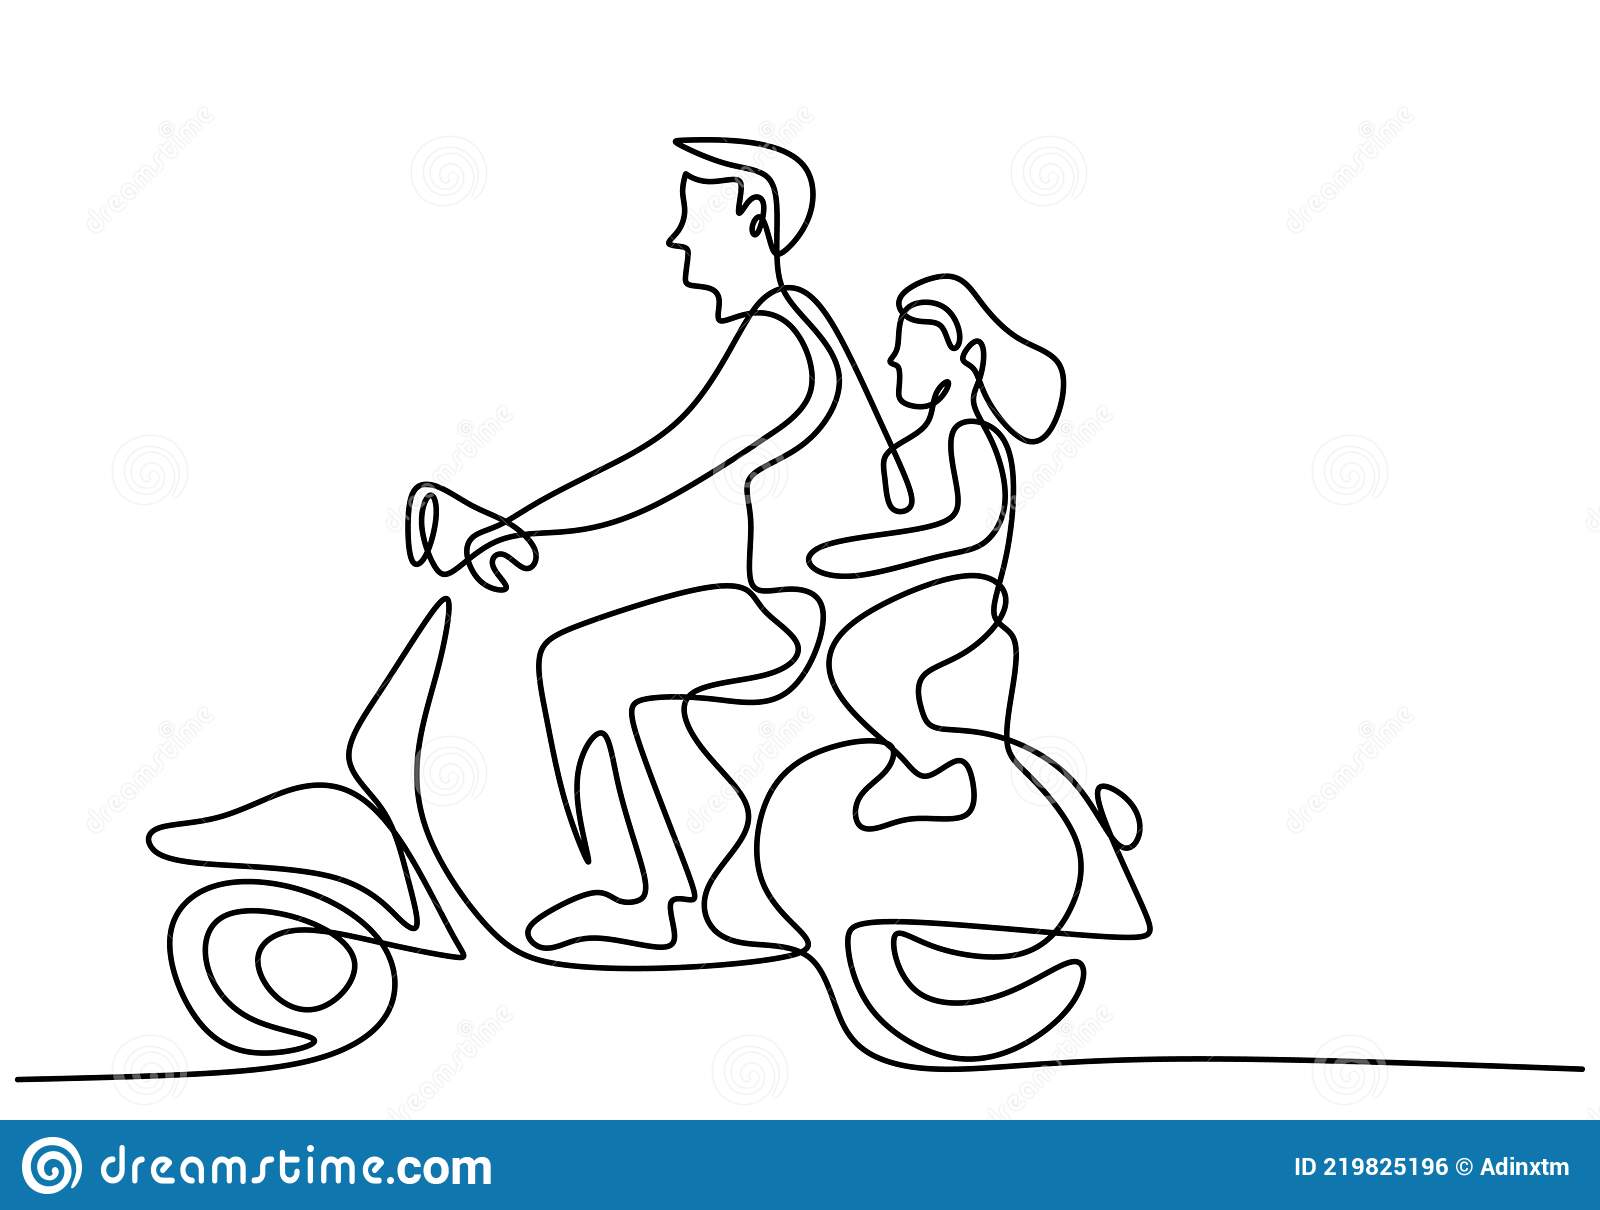 Line sketch of a dad and daughter in a motorcycle ride